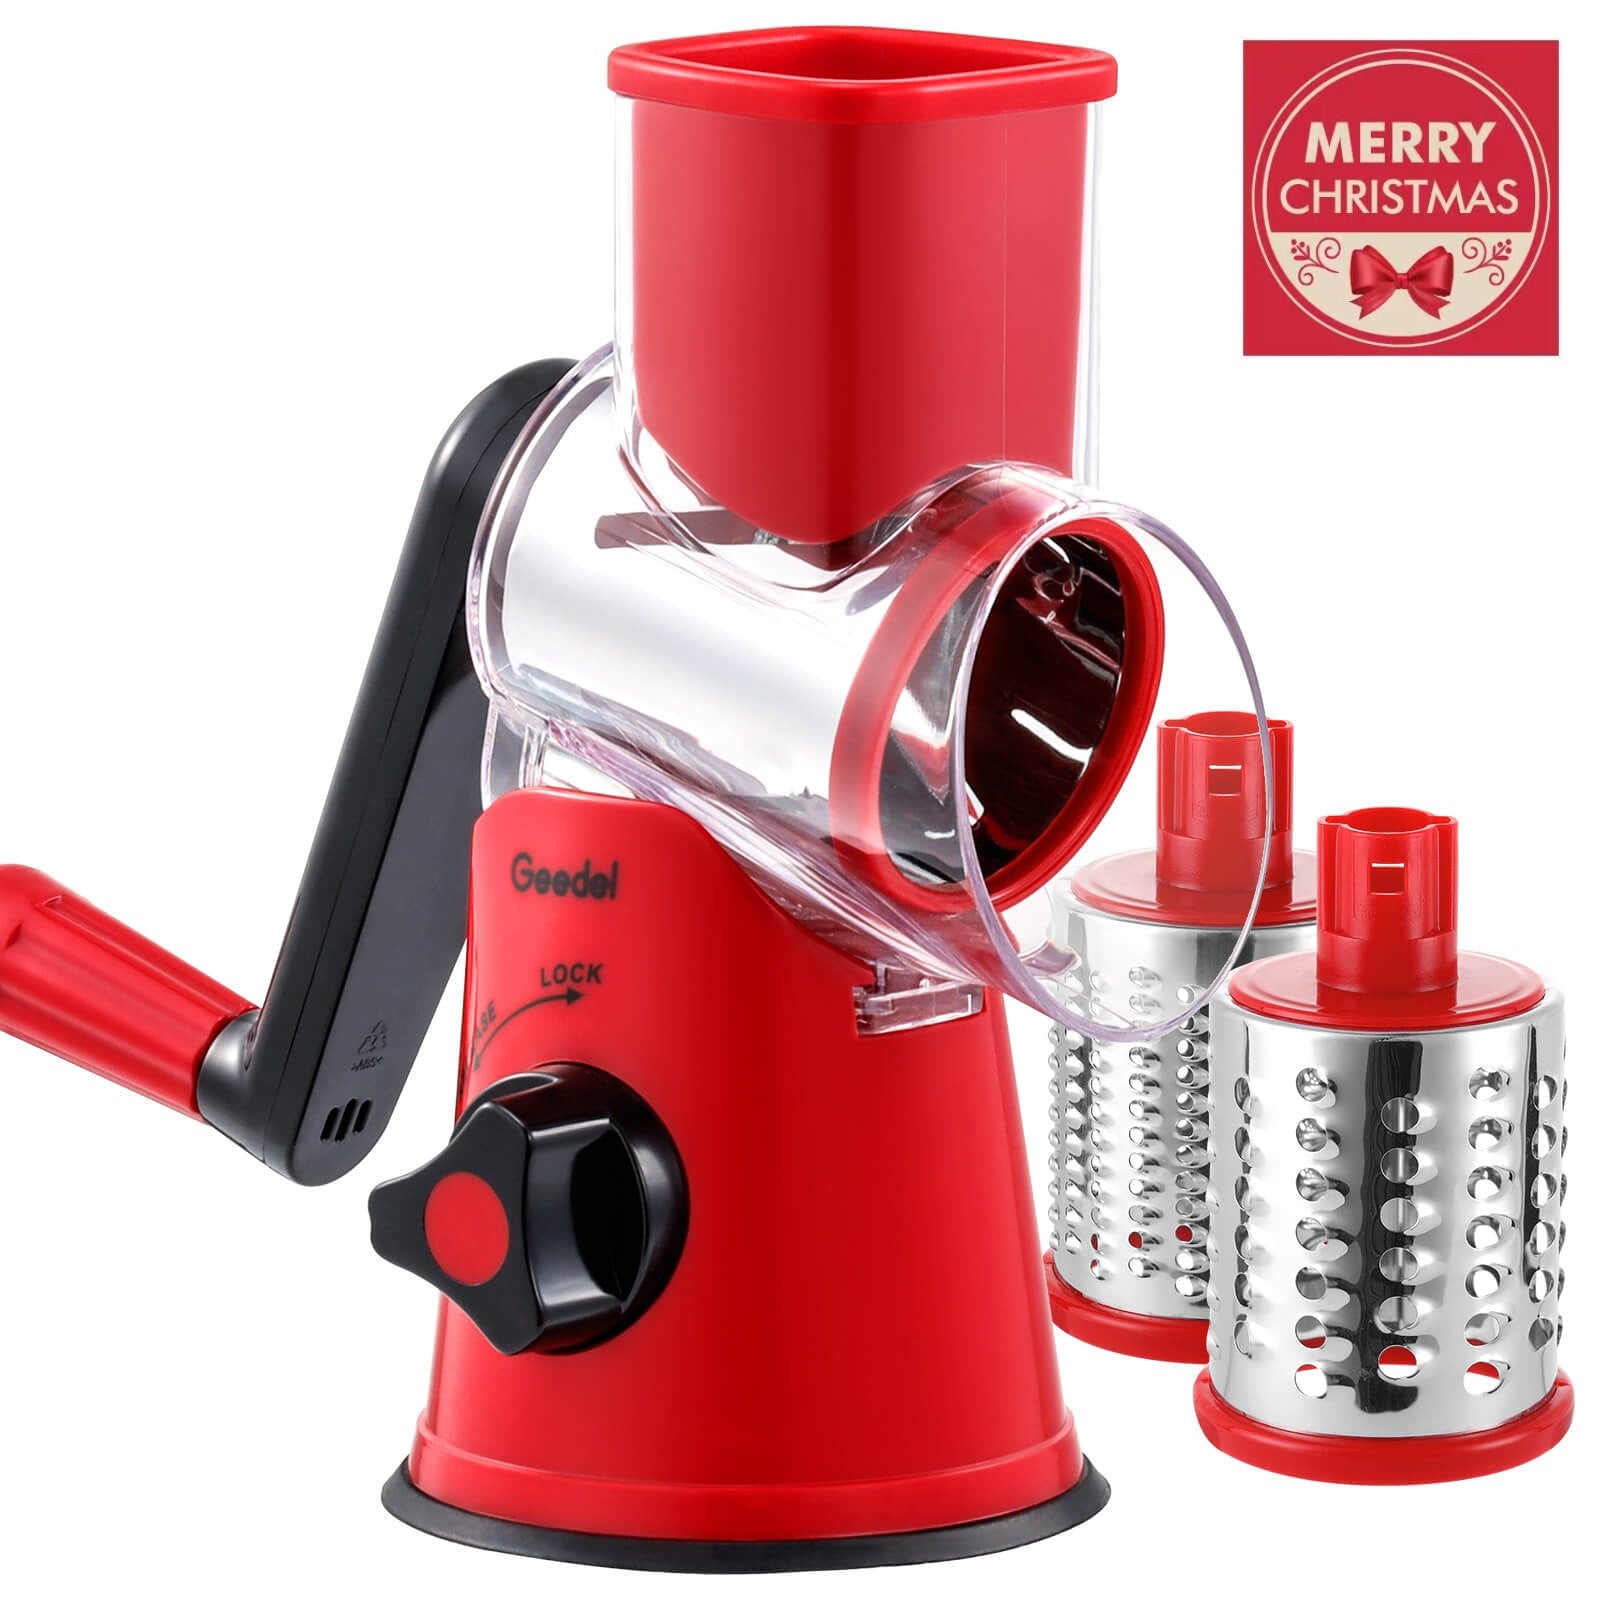 XXSSIER Rotary Cheese Grater Grinder with Handle, Heavy Duty